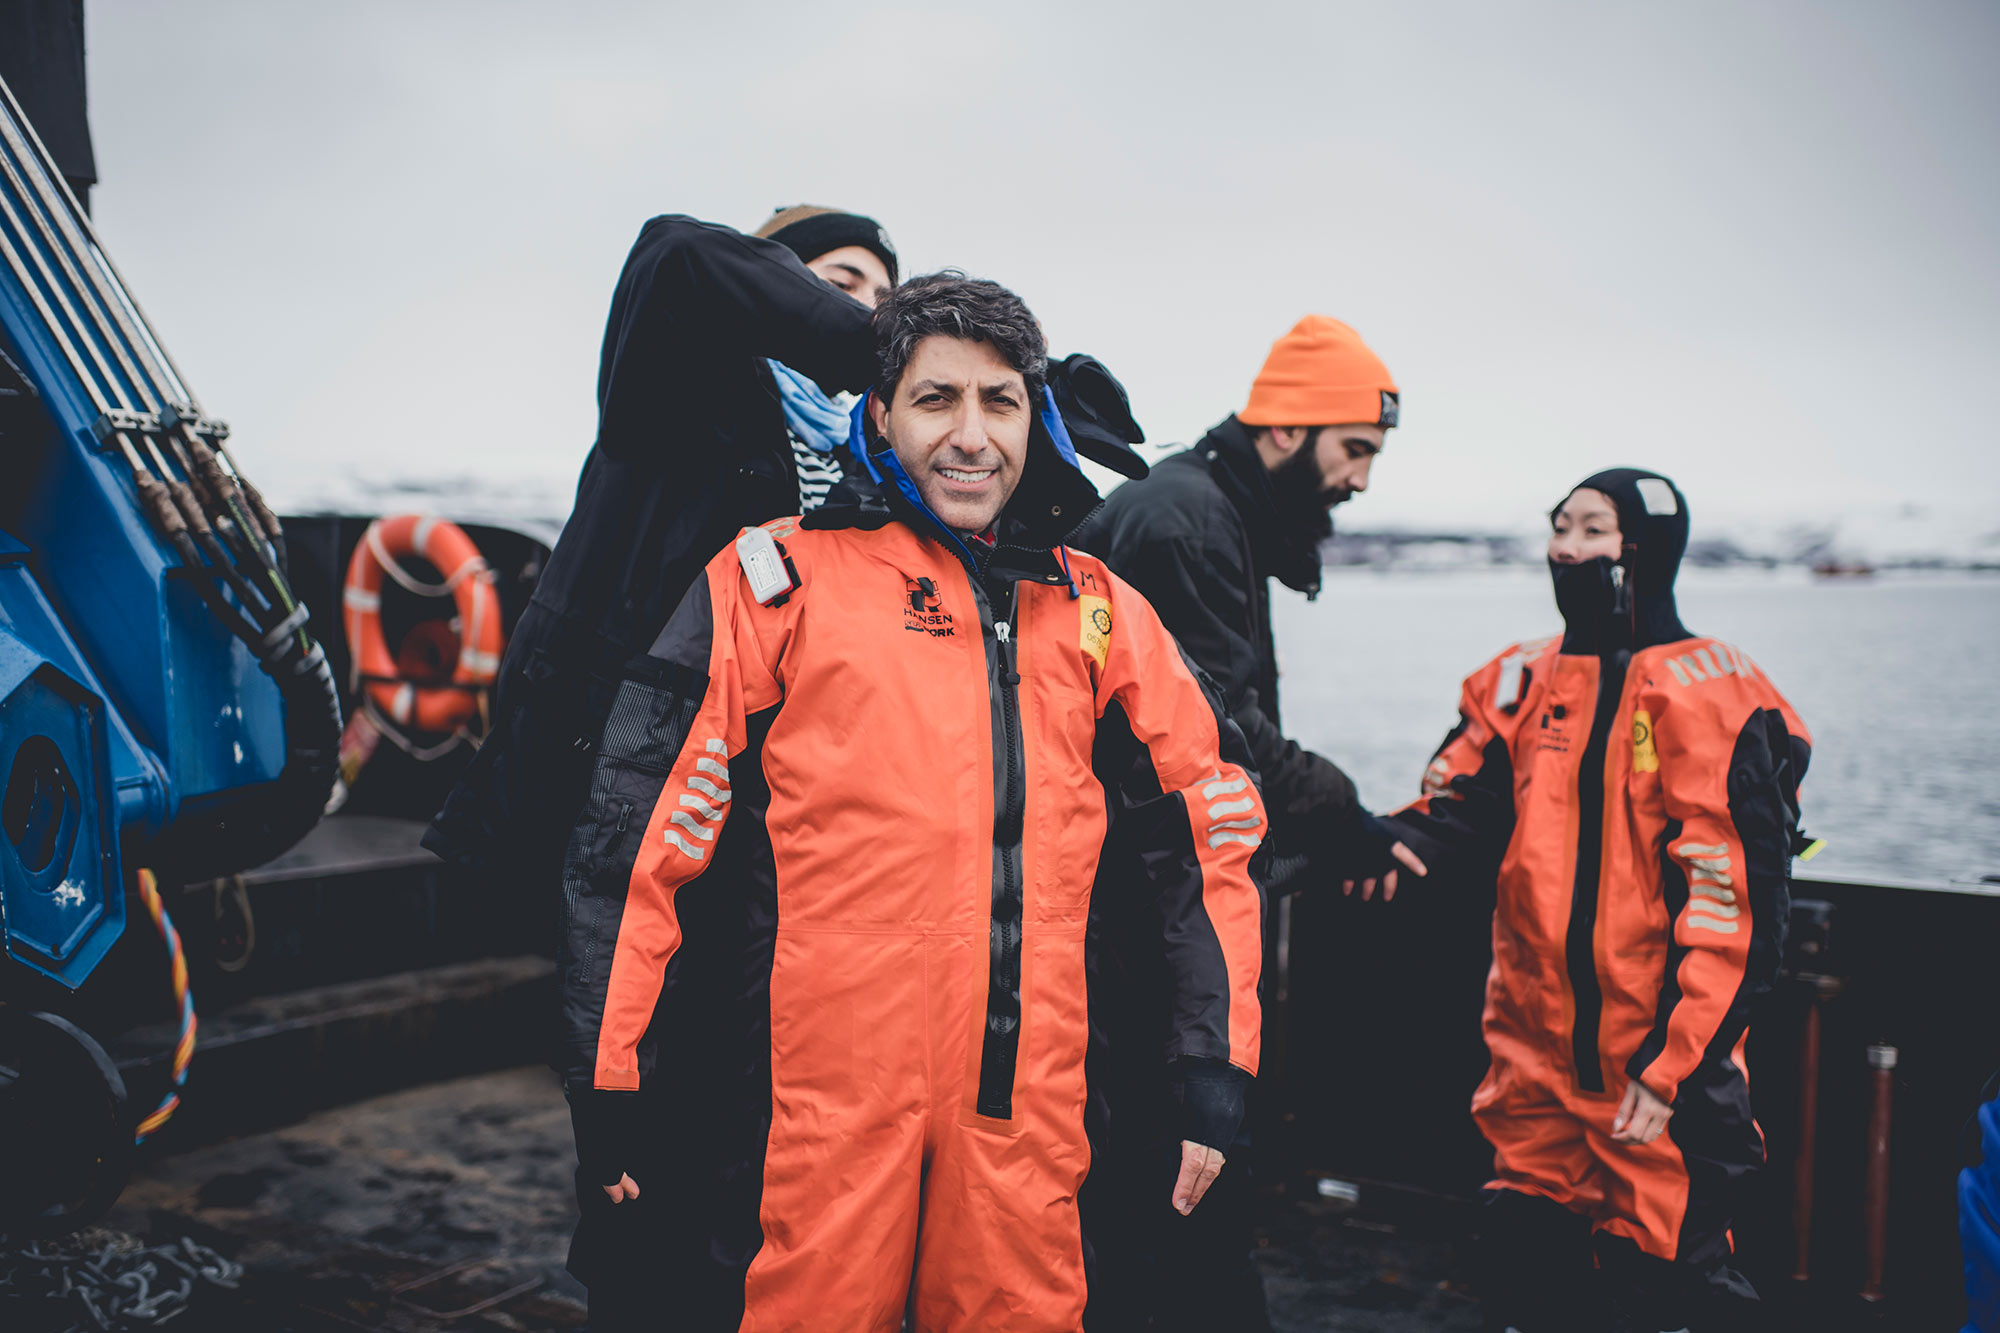 Two ice swimmers being zipped into protective orange suits